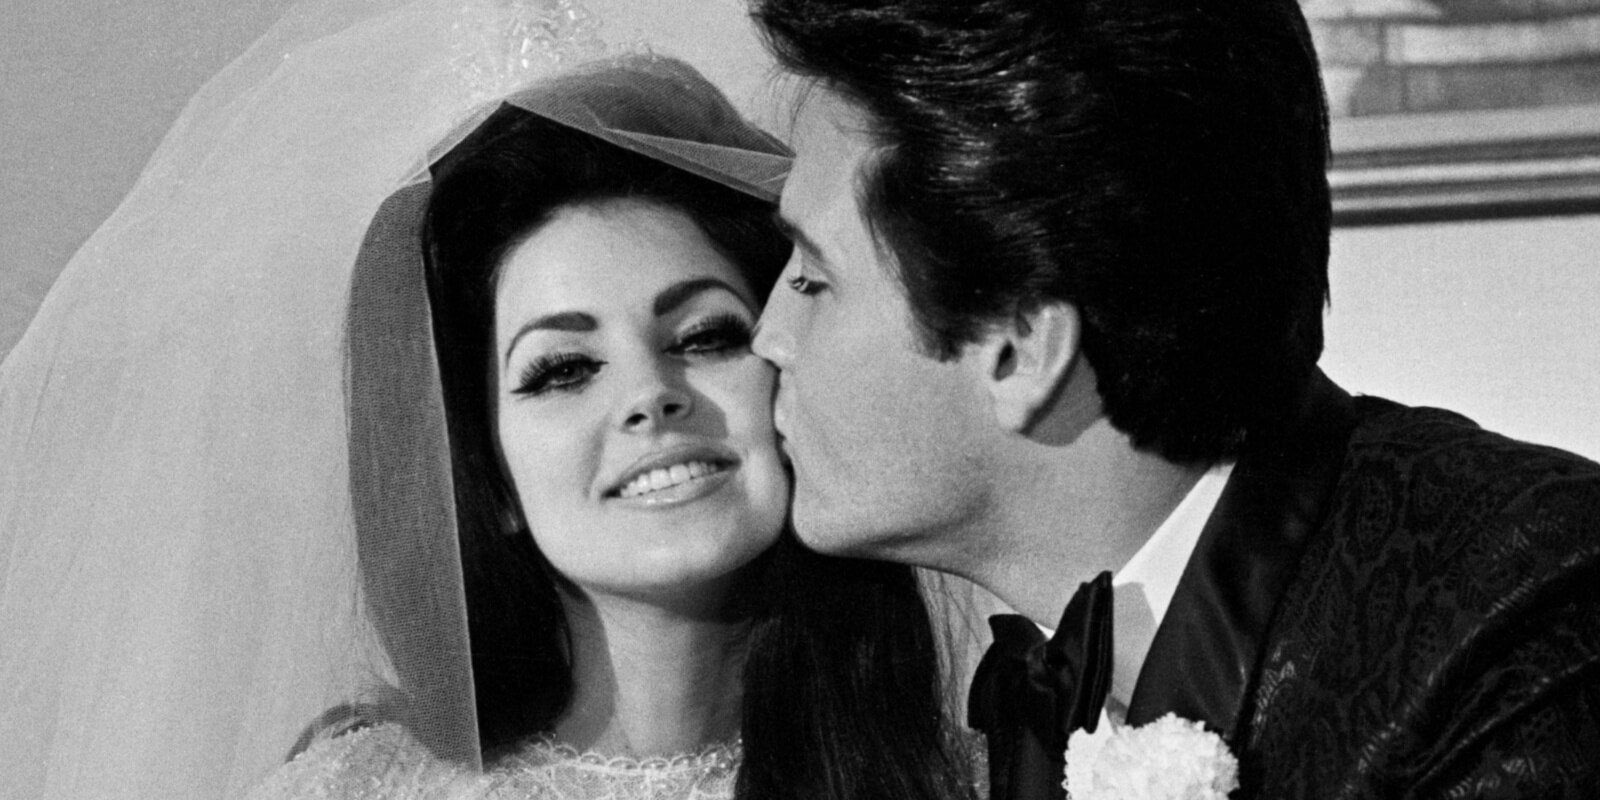 Priscilla Presley and Elvis Presley married in February 1967.